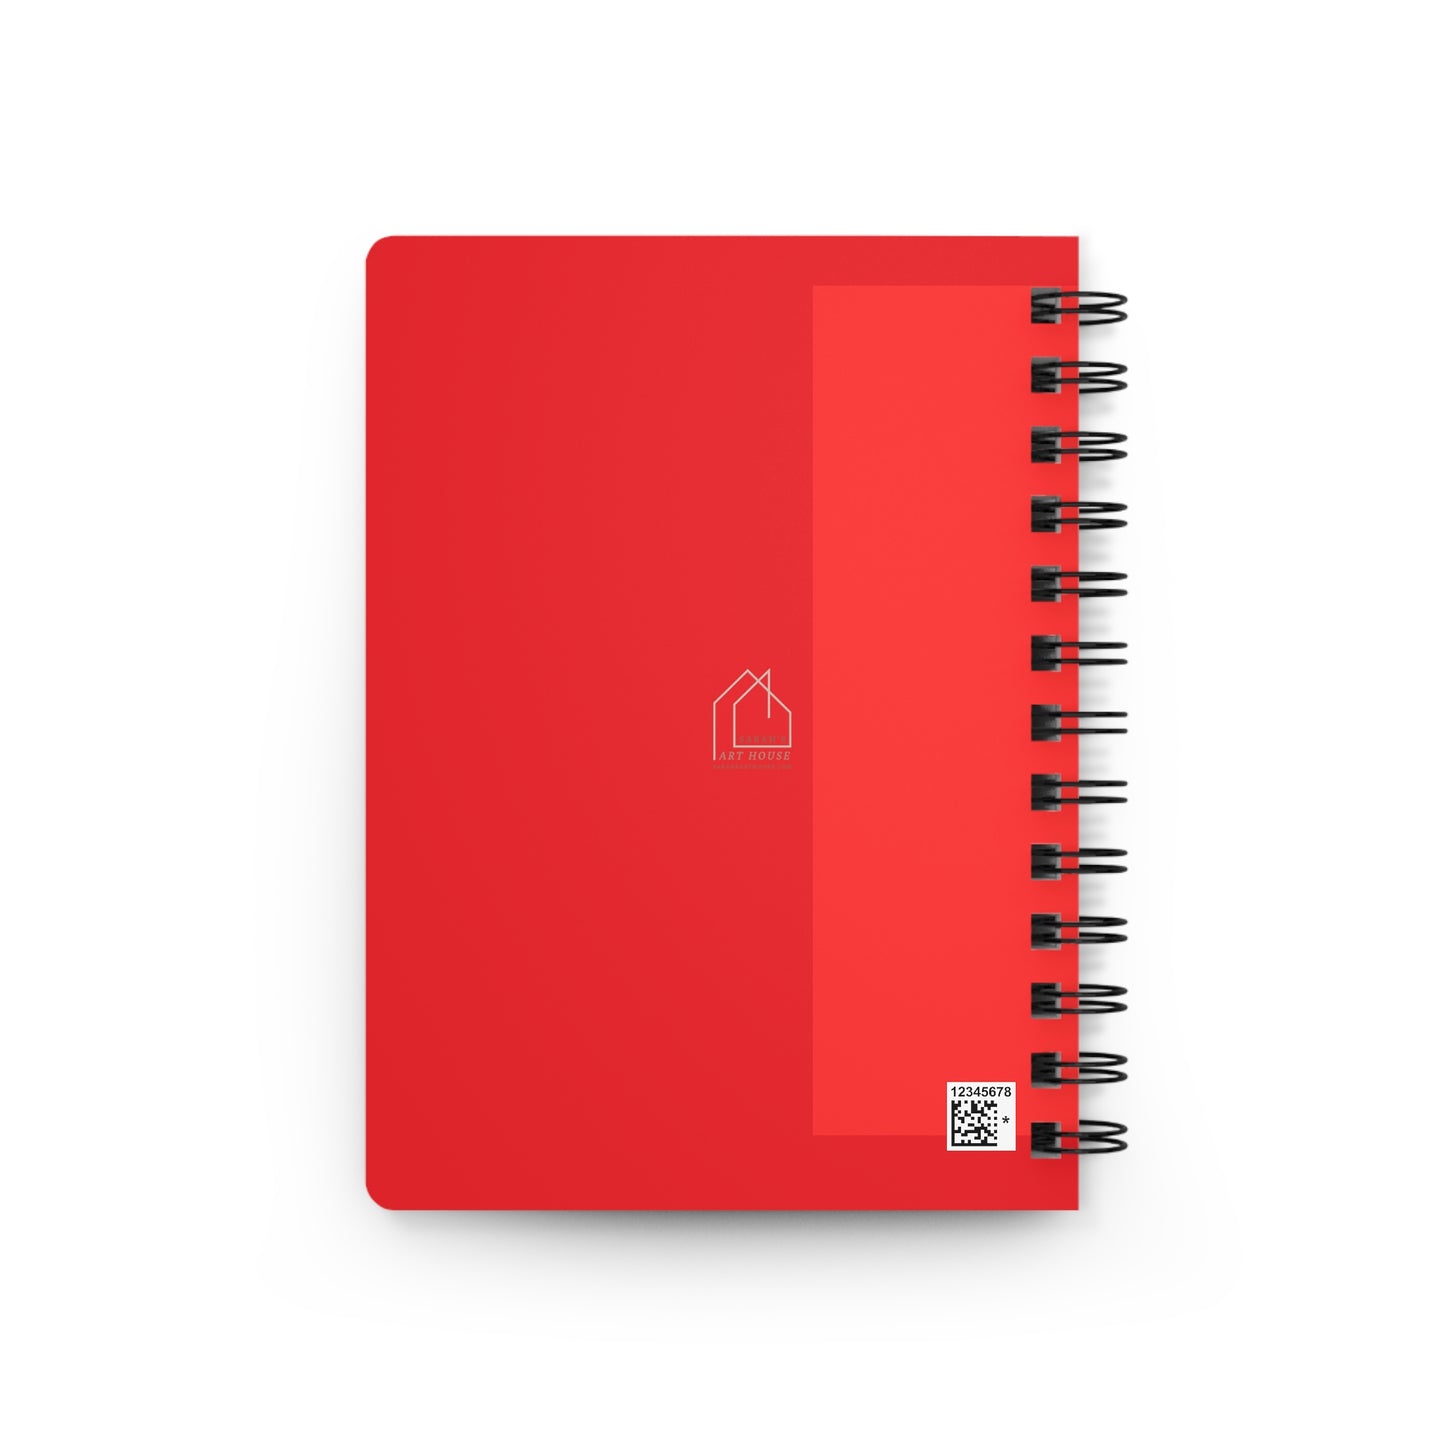 Hope - Spiral Bound Journal -Red - Holiday Notepad